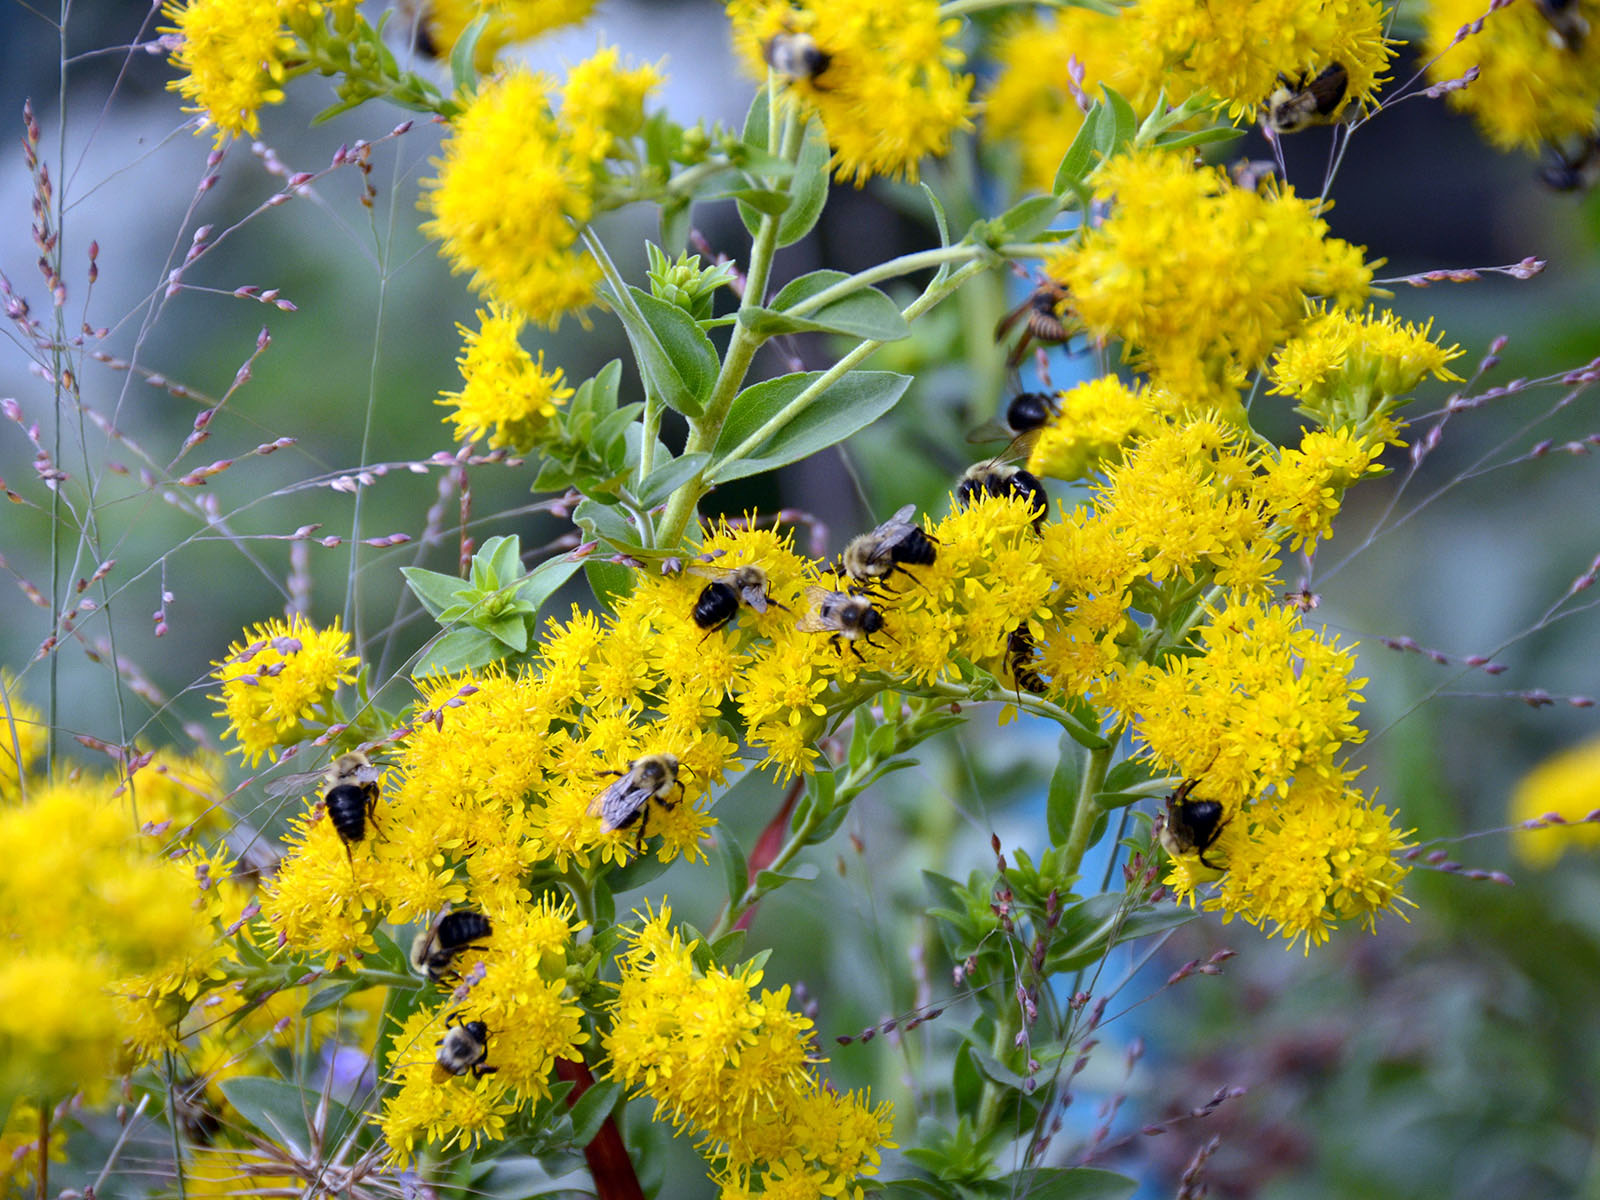 Bees nectaring on goldenrod